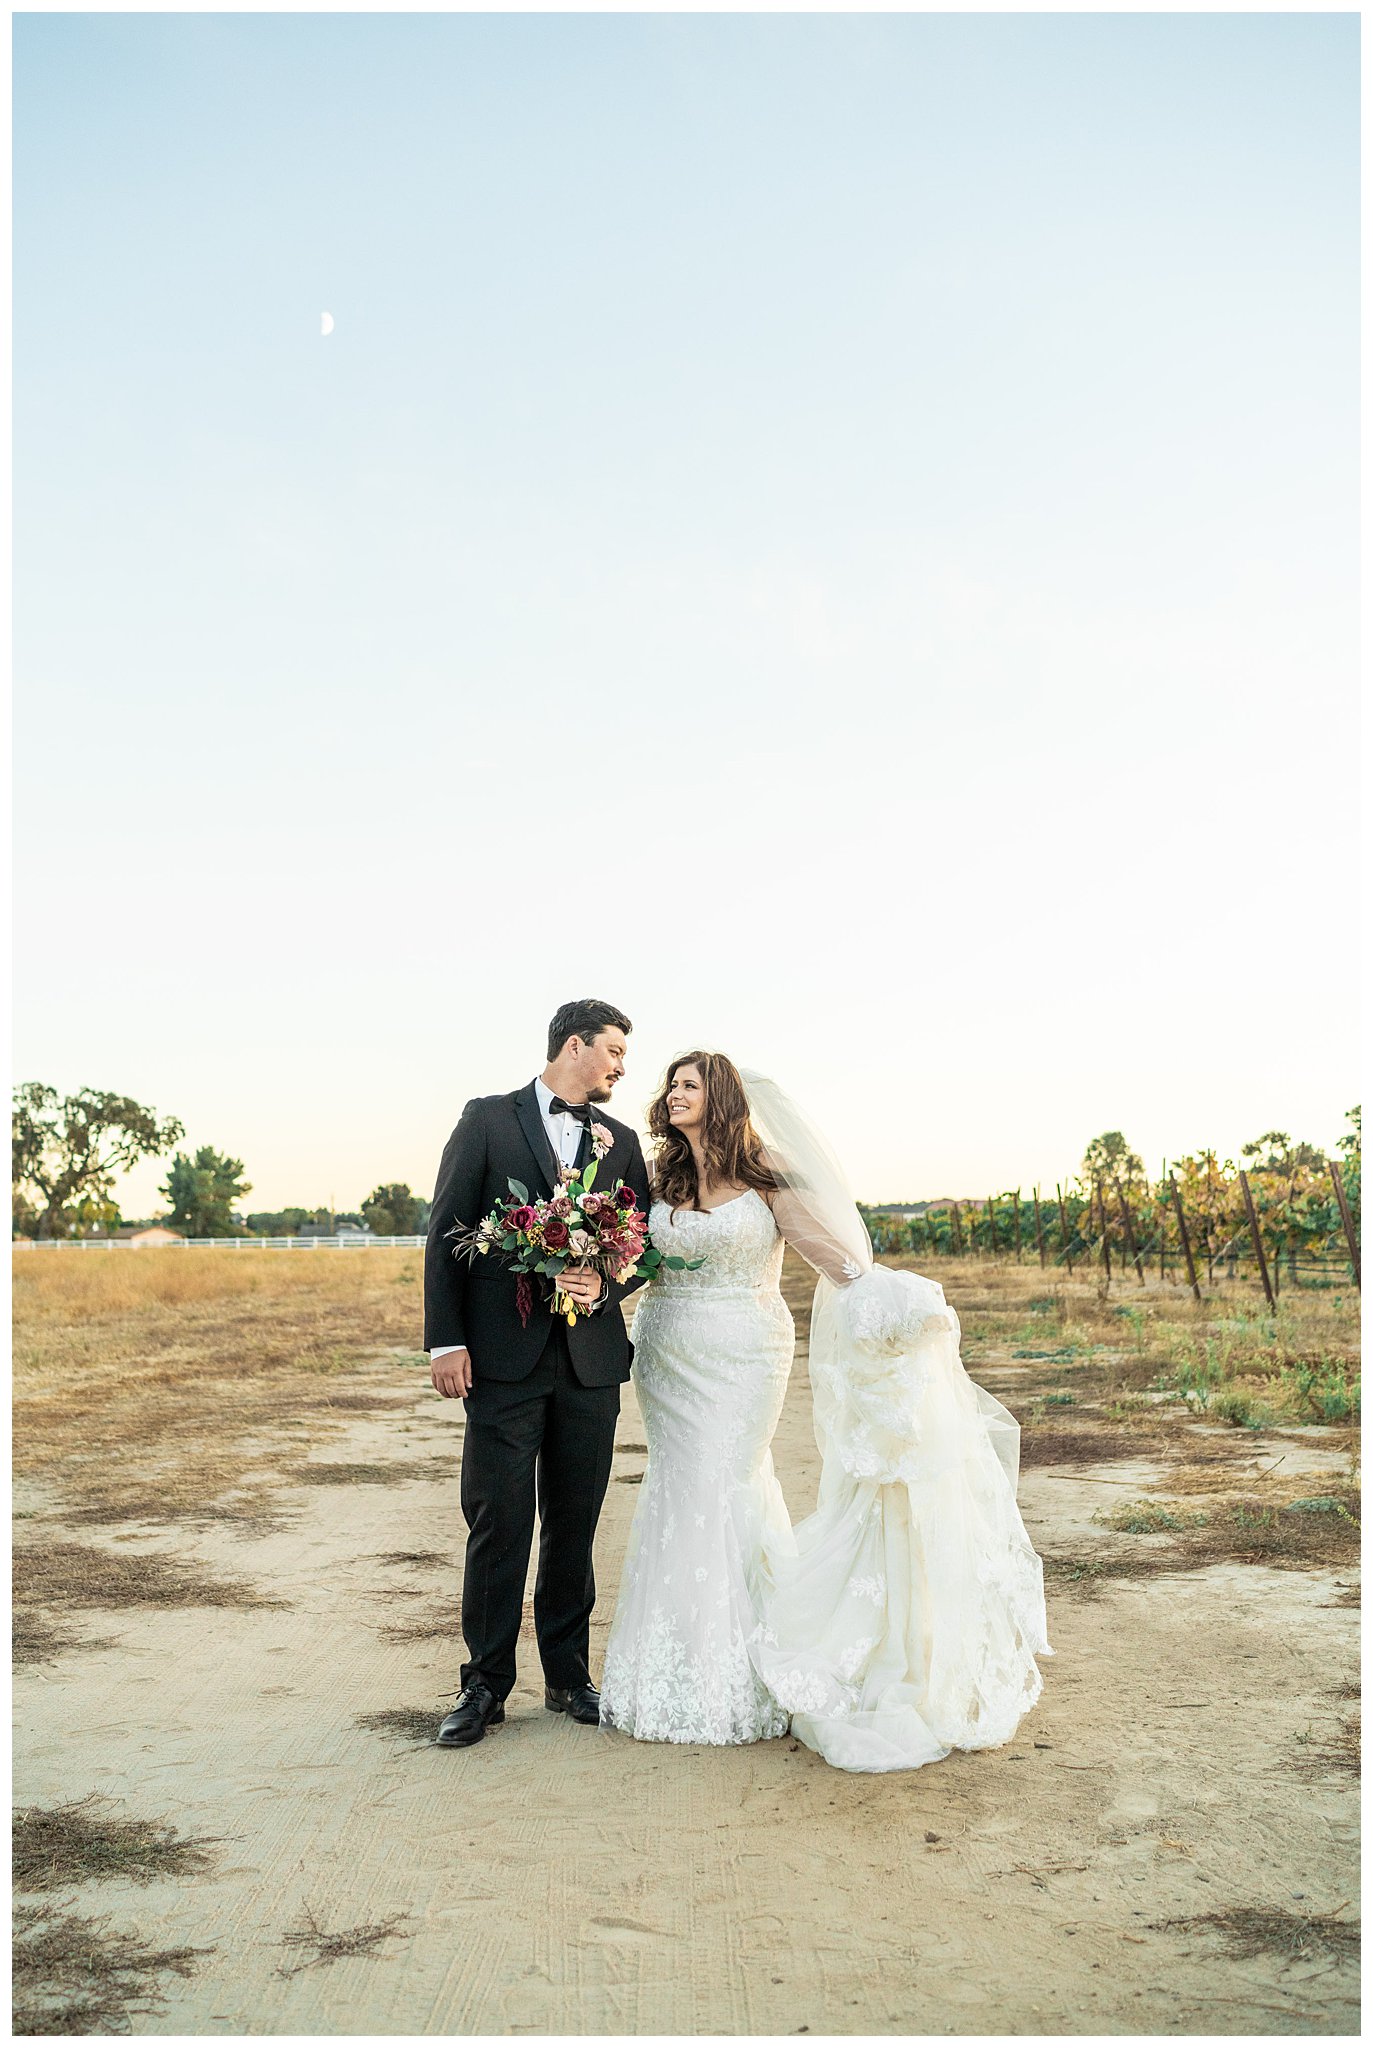 A bright and groom stand in the sunset during their wedding day in the Vineyards at Cali Paso, winery, and Villa in Paso Robles.